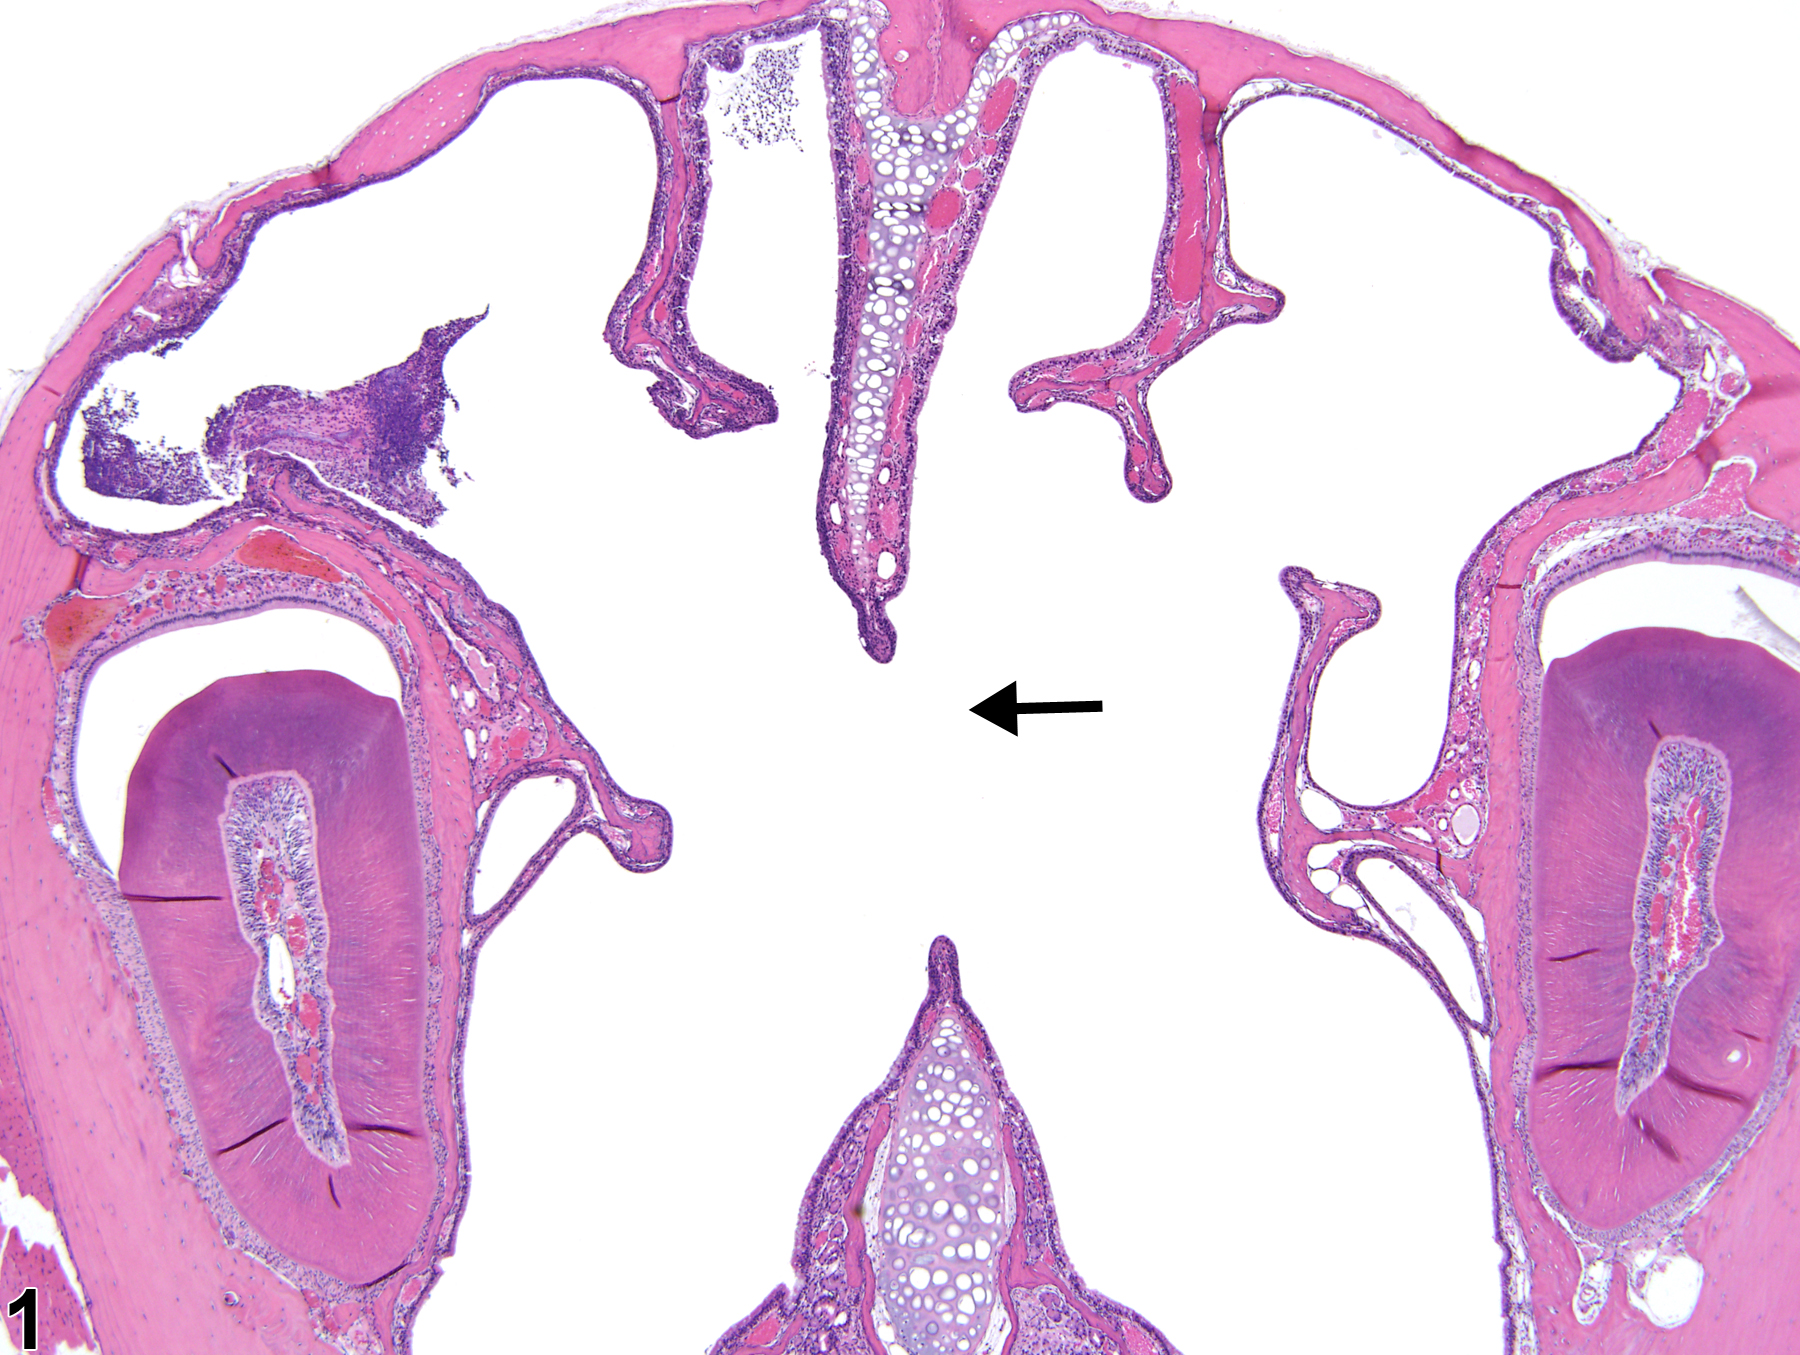 Image of perforation in the nose, septum from a female B6C3F1/N mouse in a chronic study